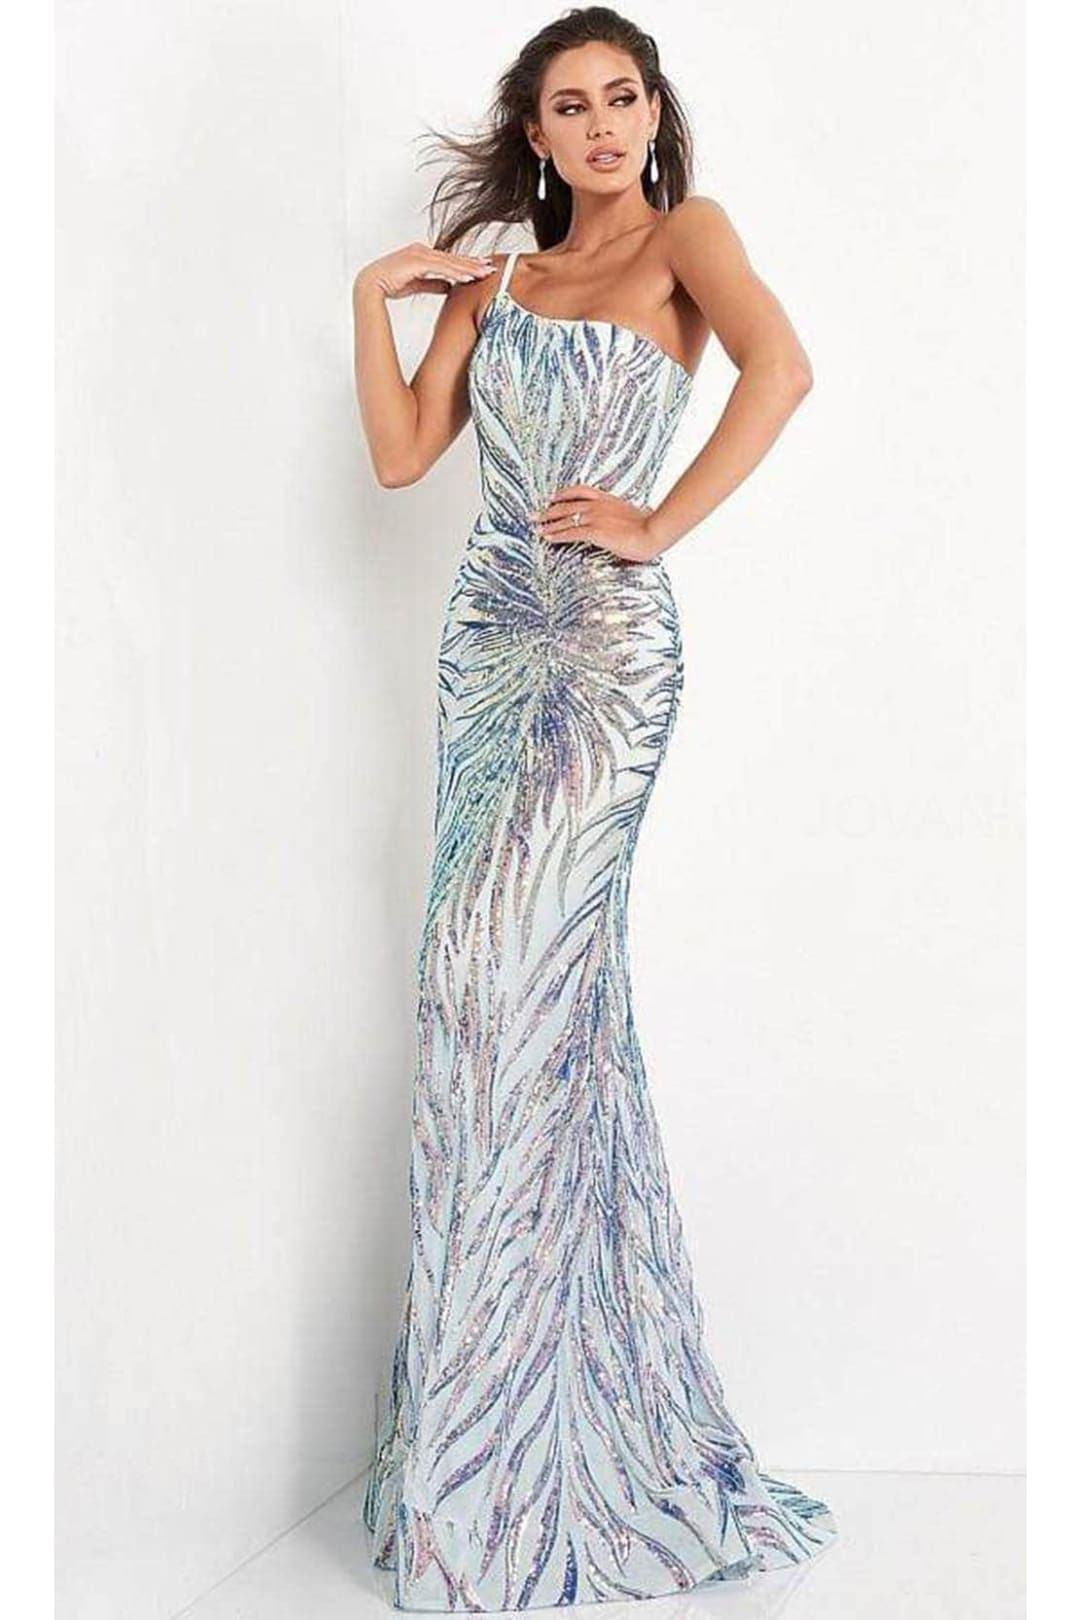 Jovani 05664 One Shoulder Iridescent Sequin Fitted Prom Dress - Dress